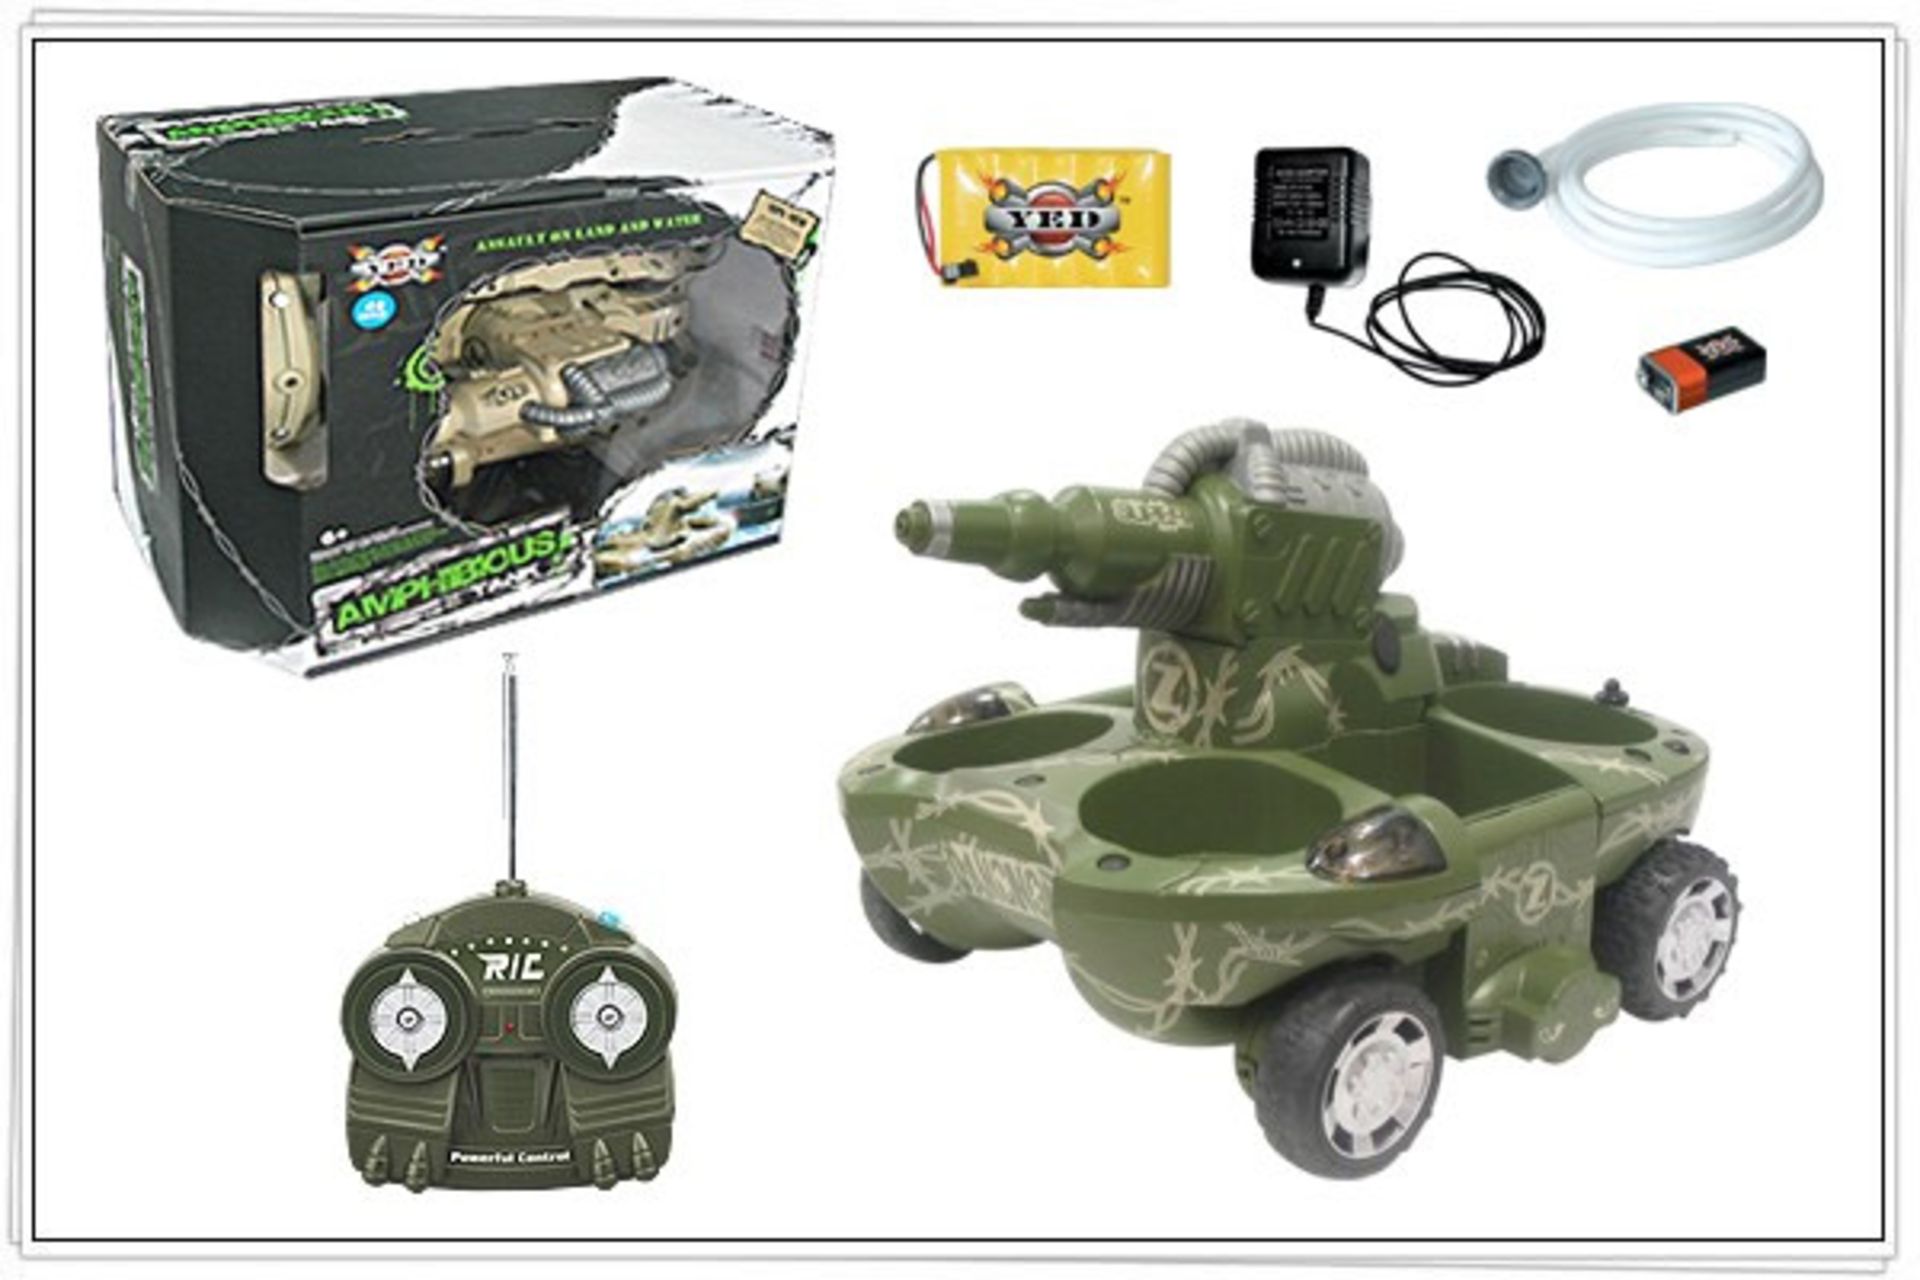 V Brand New R/C Amphibious Super Tank With Water Firing Cannon Works On Land & Water RRP74.99 X 2